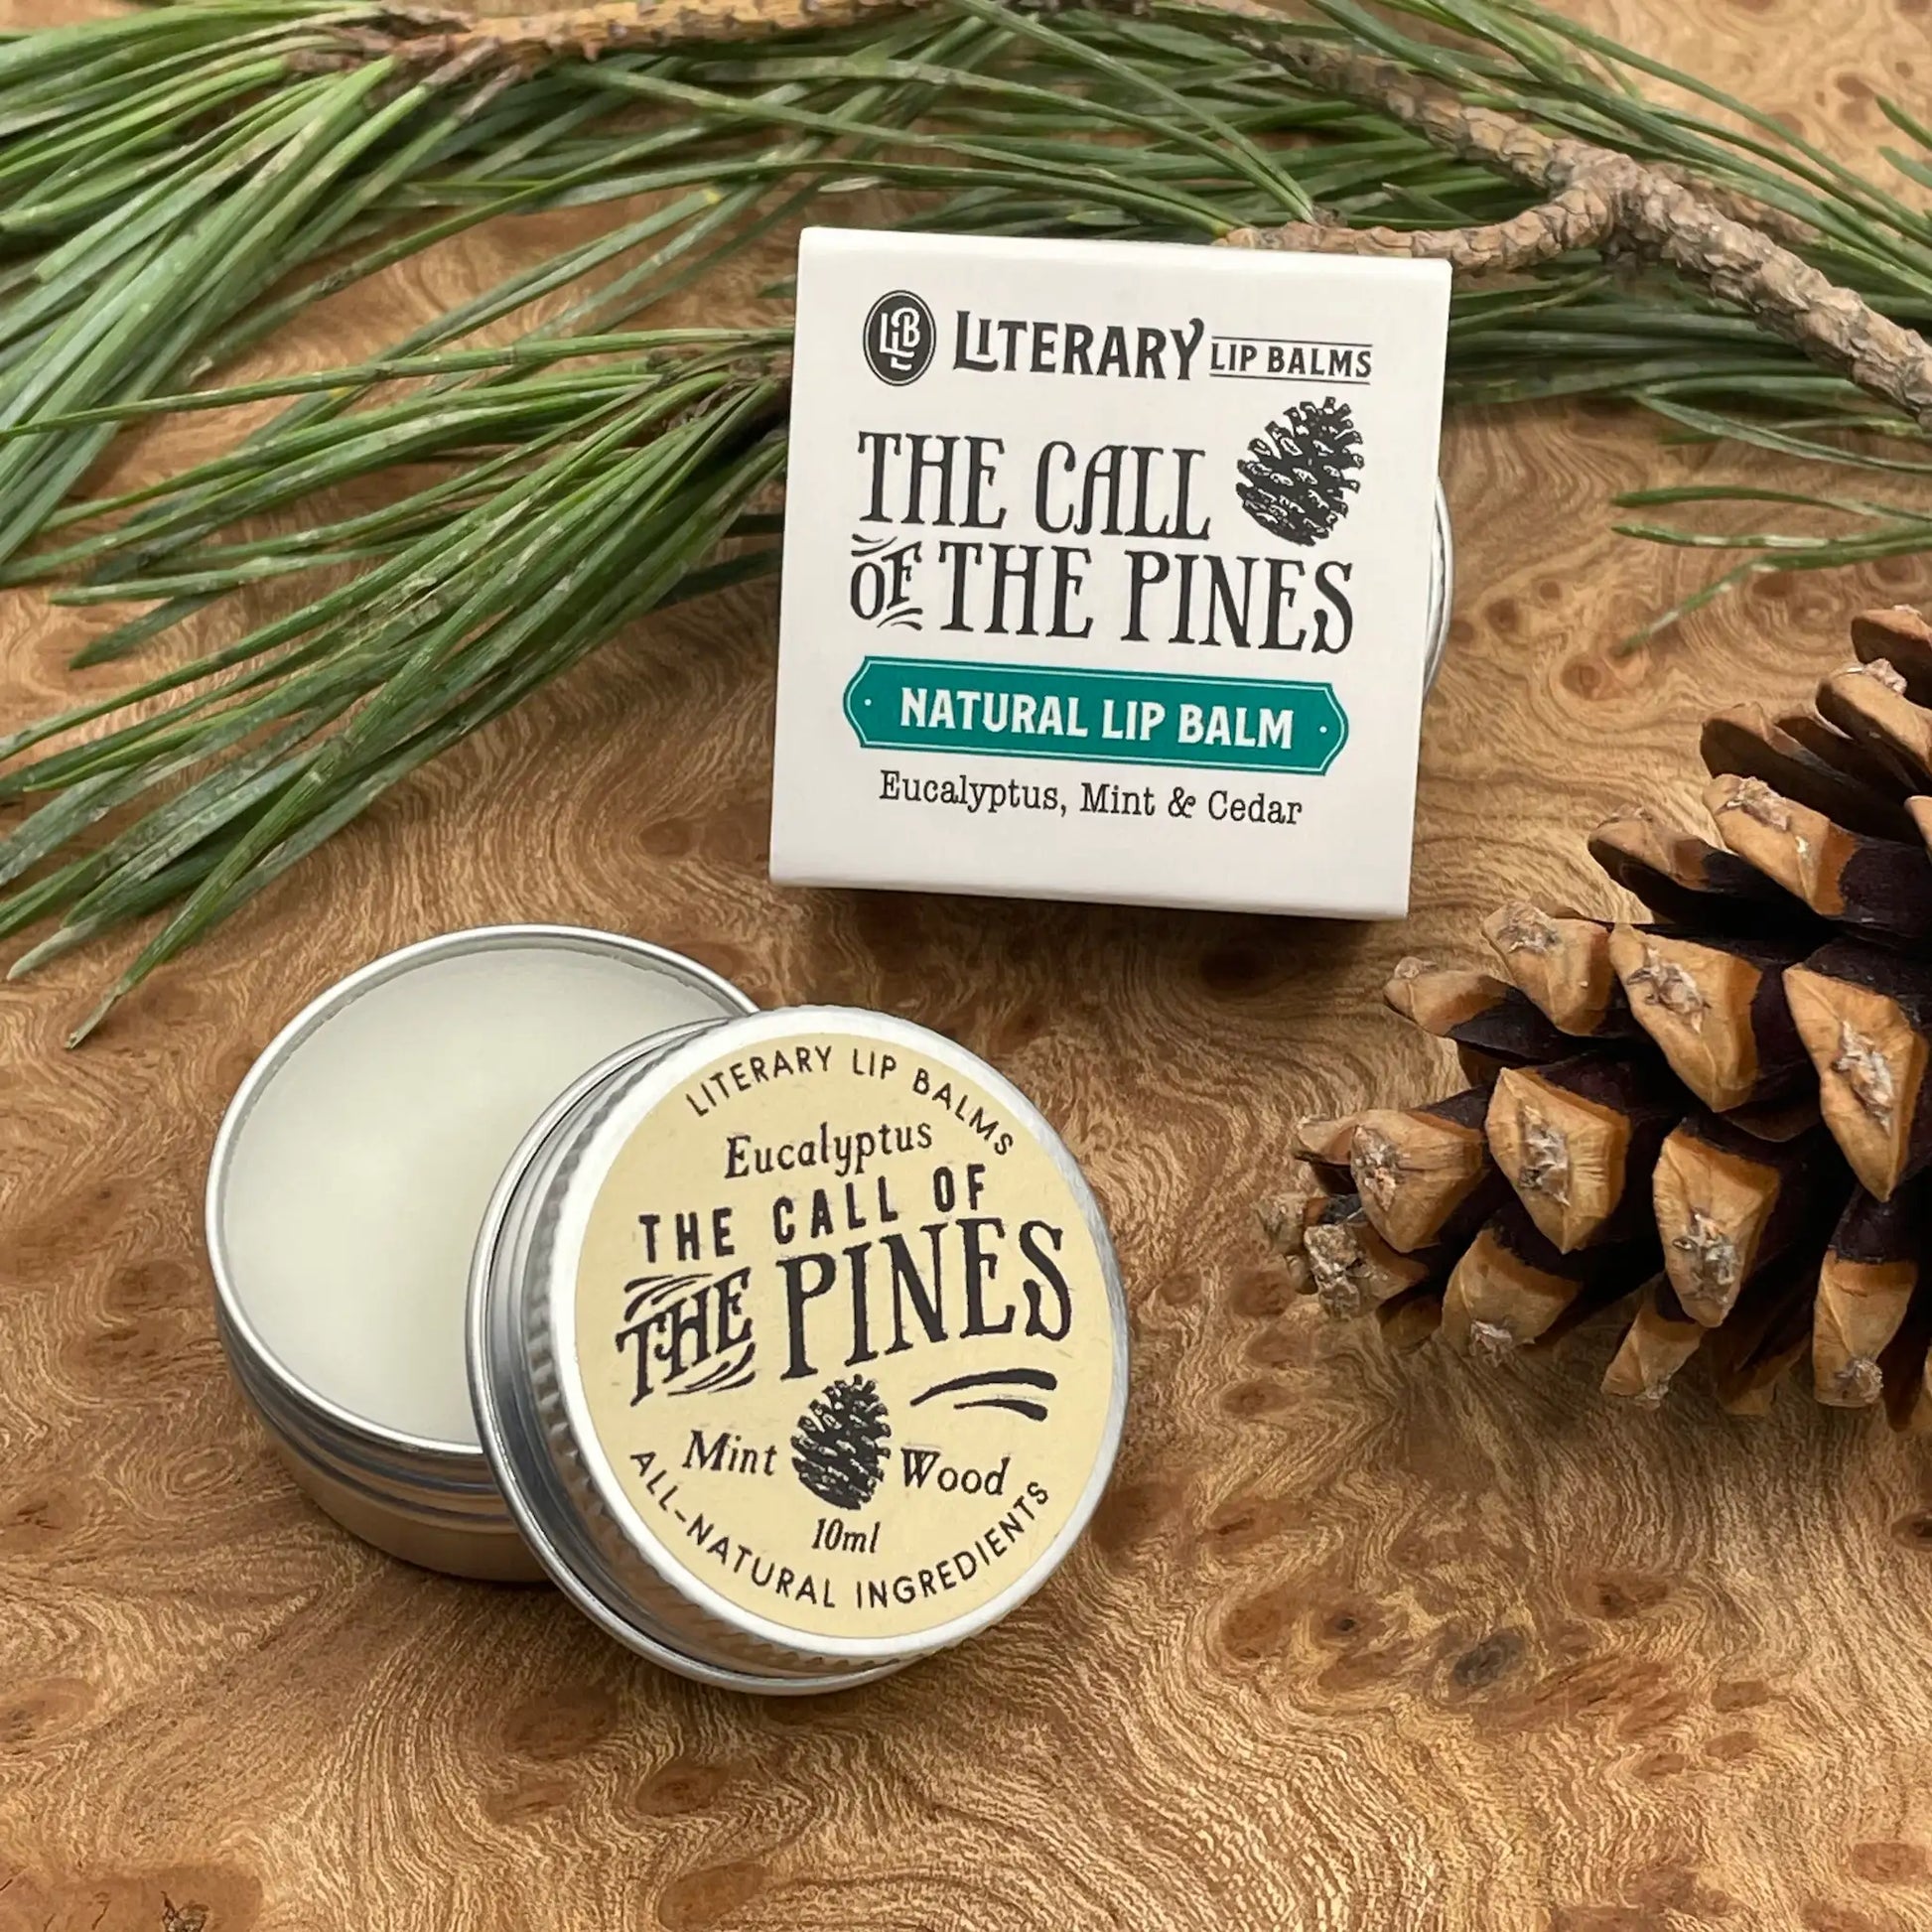 The Call of the Pines Lip Balm, made my Literary Lip Balms and packaged in a recyclable eco-friendly and pocket-sized tin.